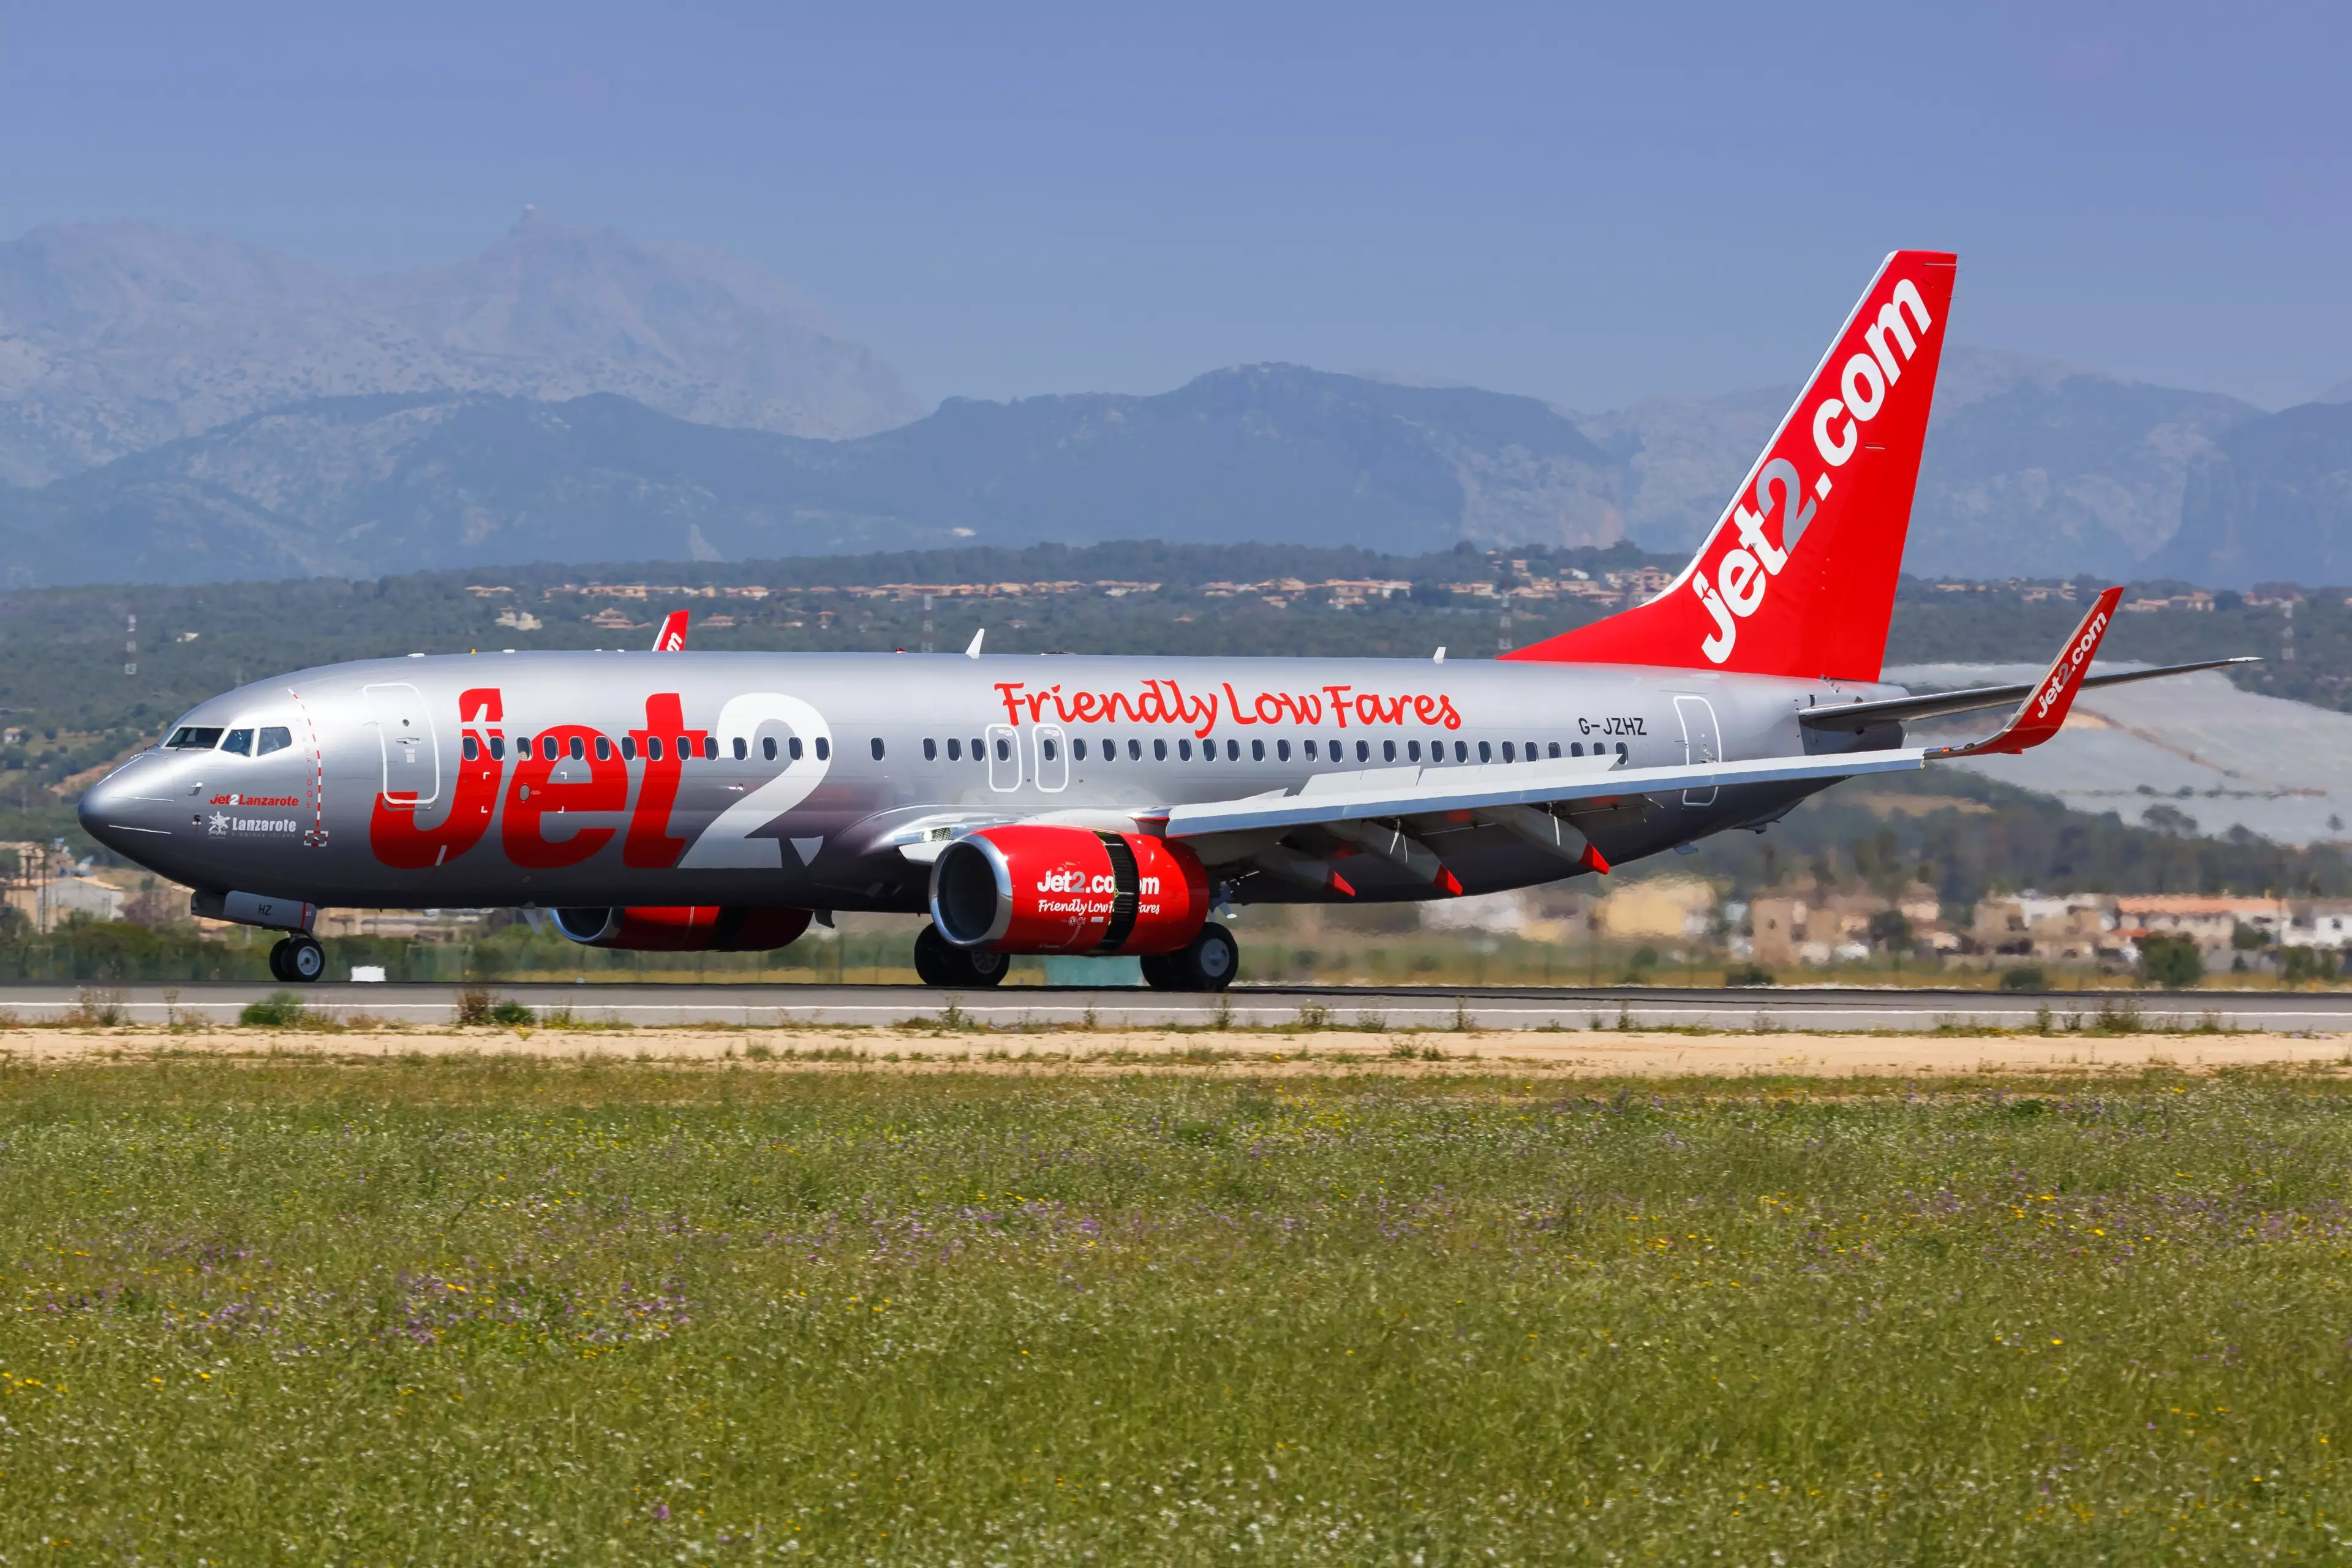 Jet2 has come under fire for its policy on flights.